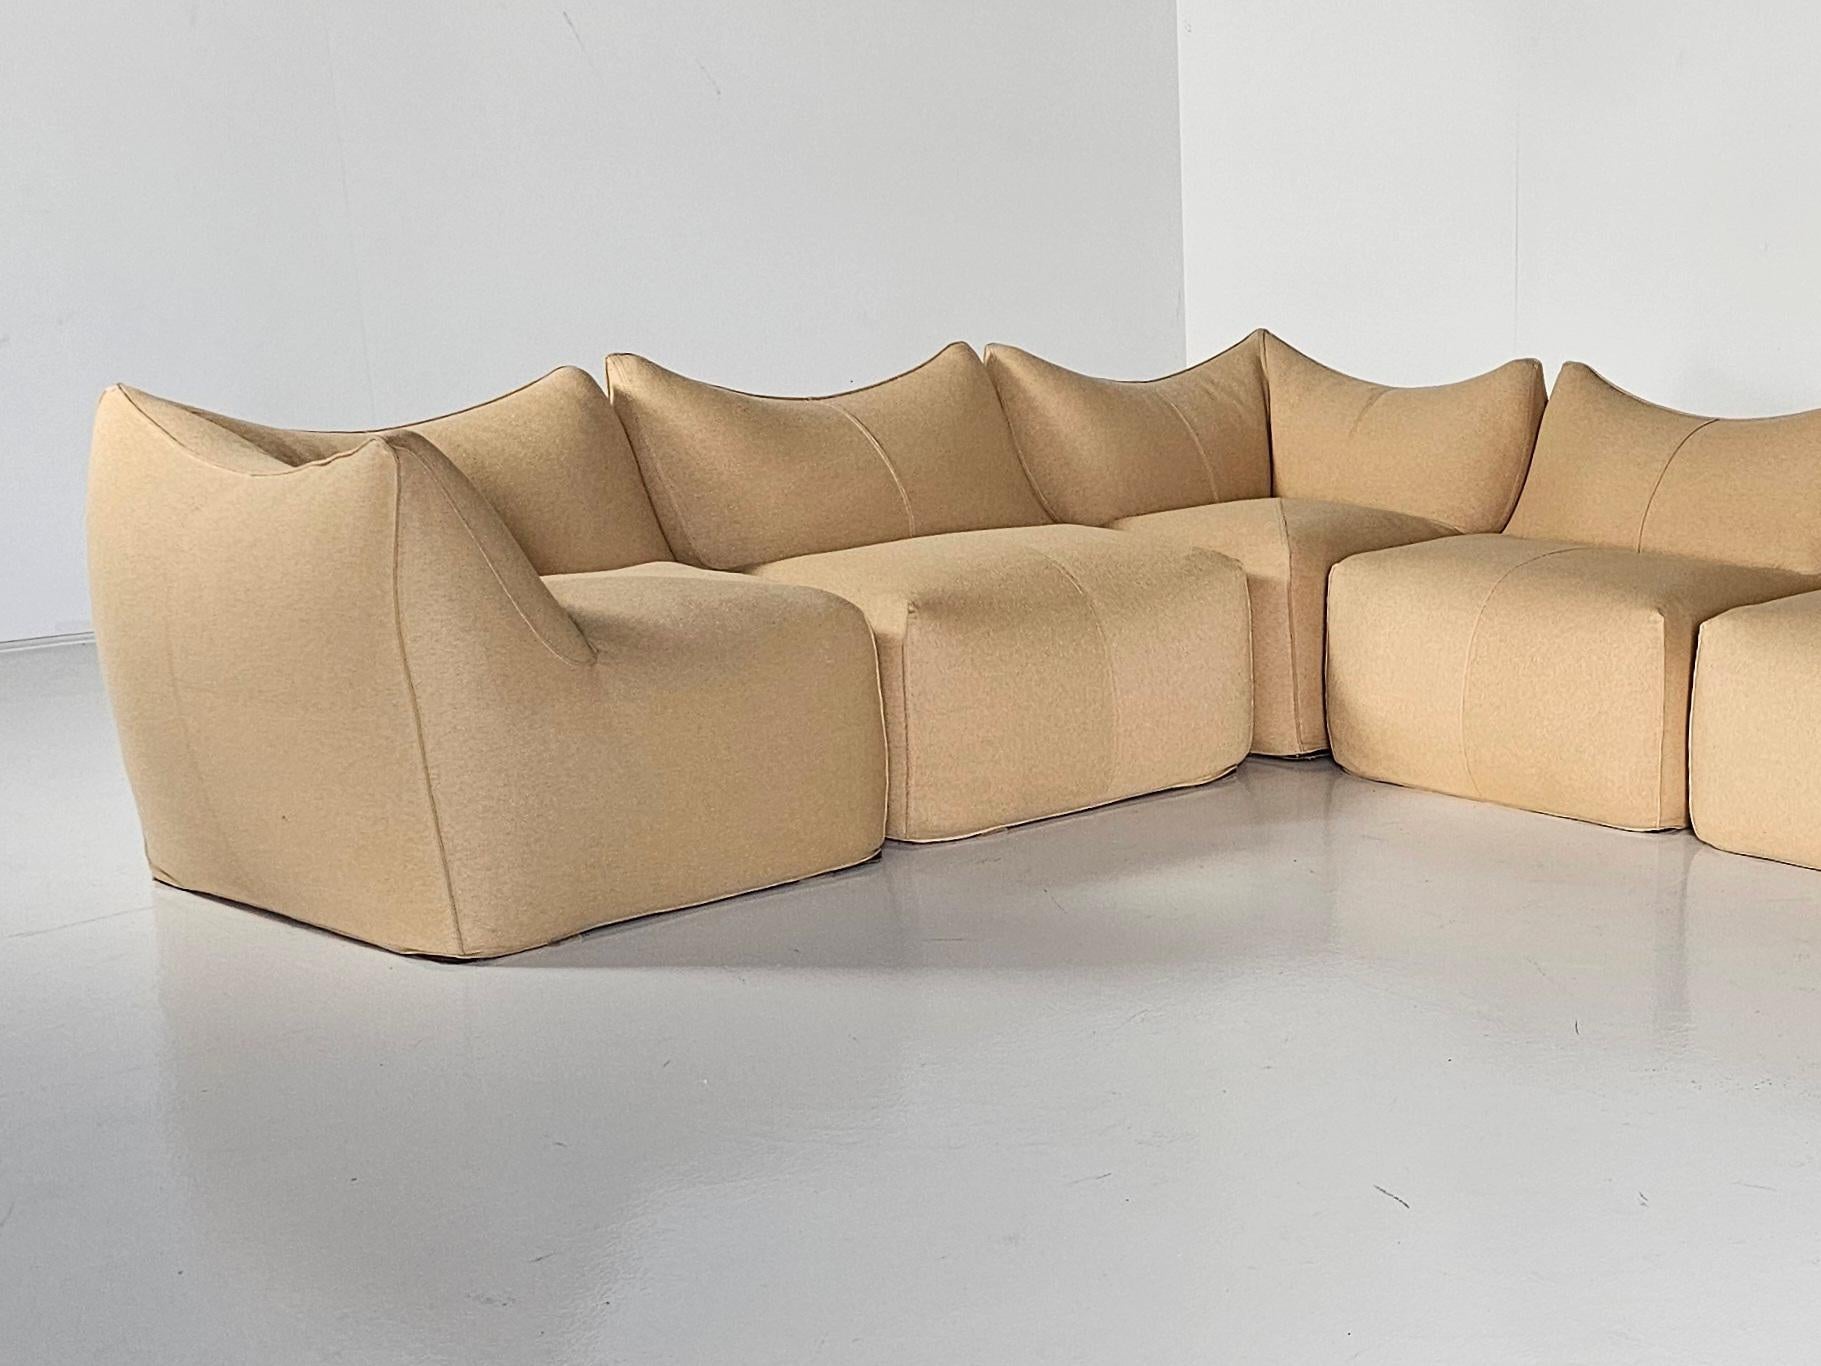 Le Bambole sand color Sectional Sofa by Mario Bellni for B&B Italia, 1970s In Good Condition For Sale In amstelveen, NL